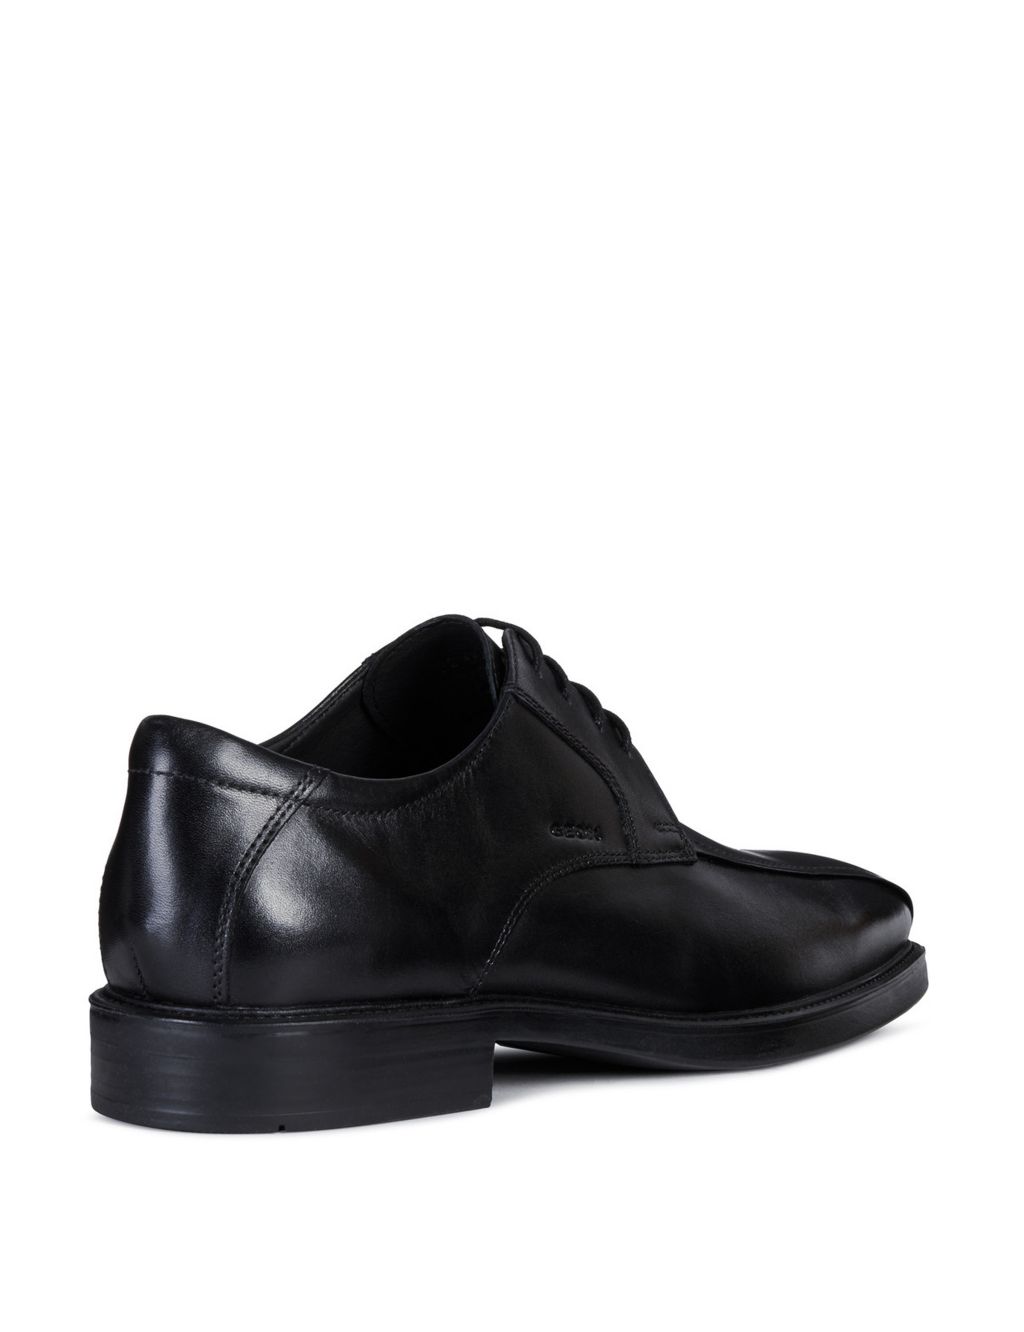 Wide Fit Leather Oxford Shoes image 4